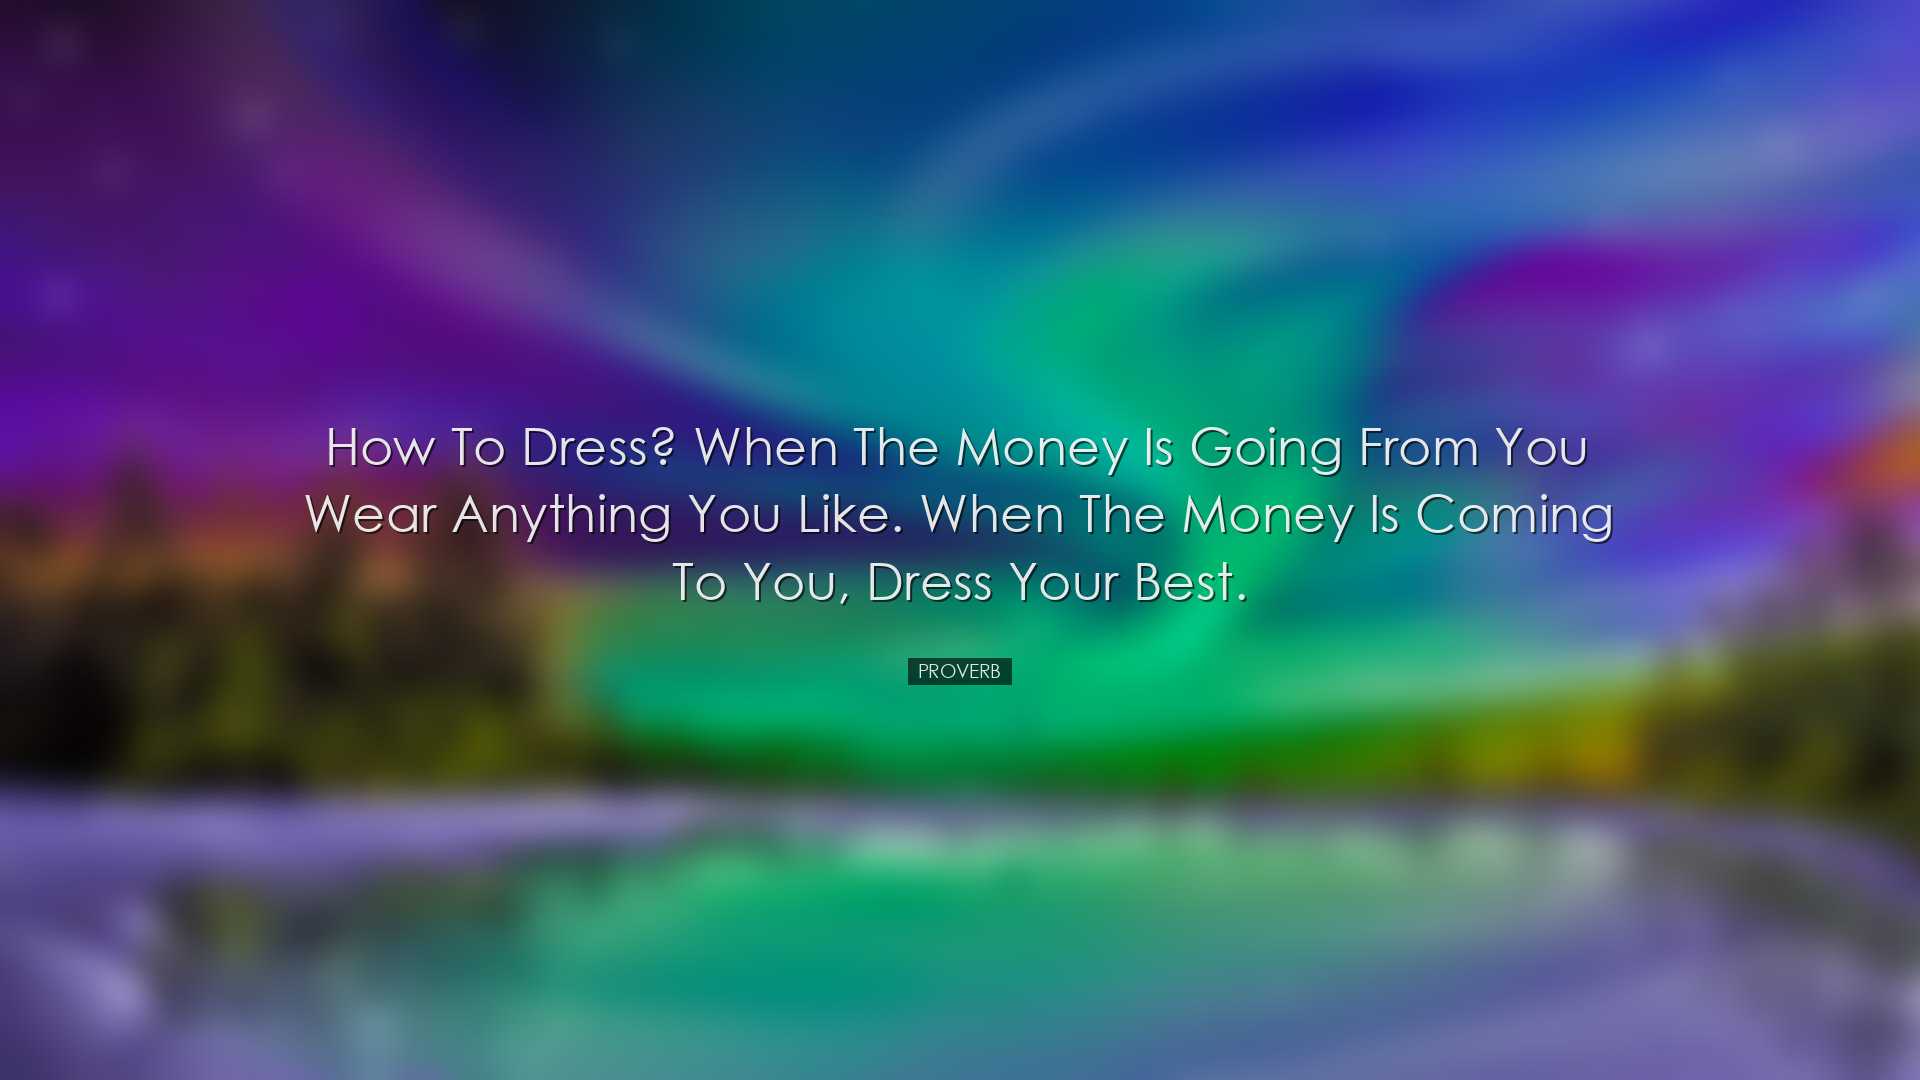 How to dress? When the money is going from you wear anything you l